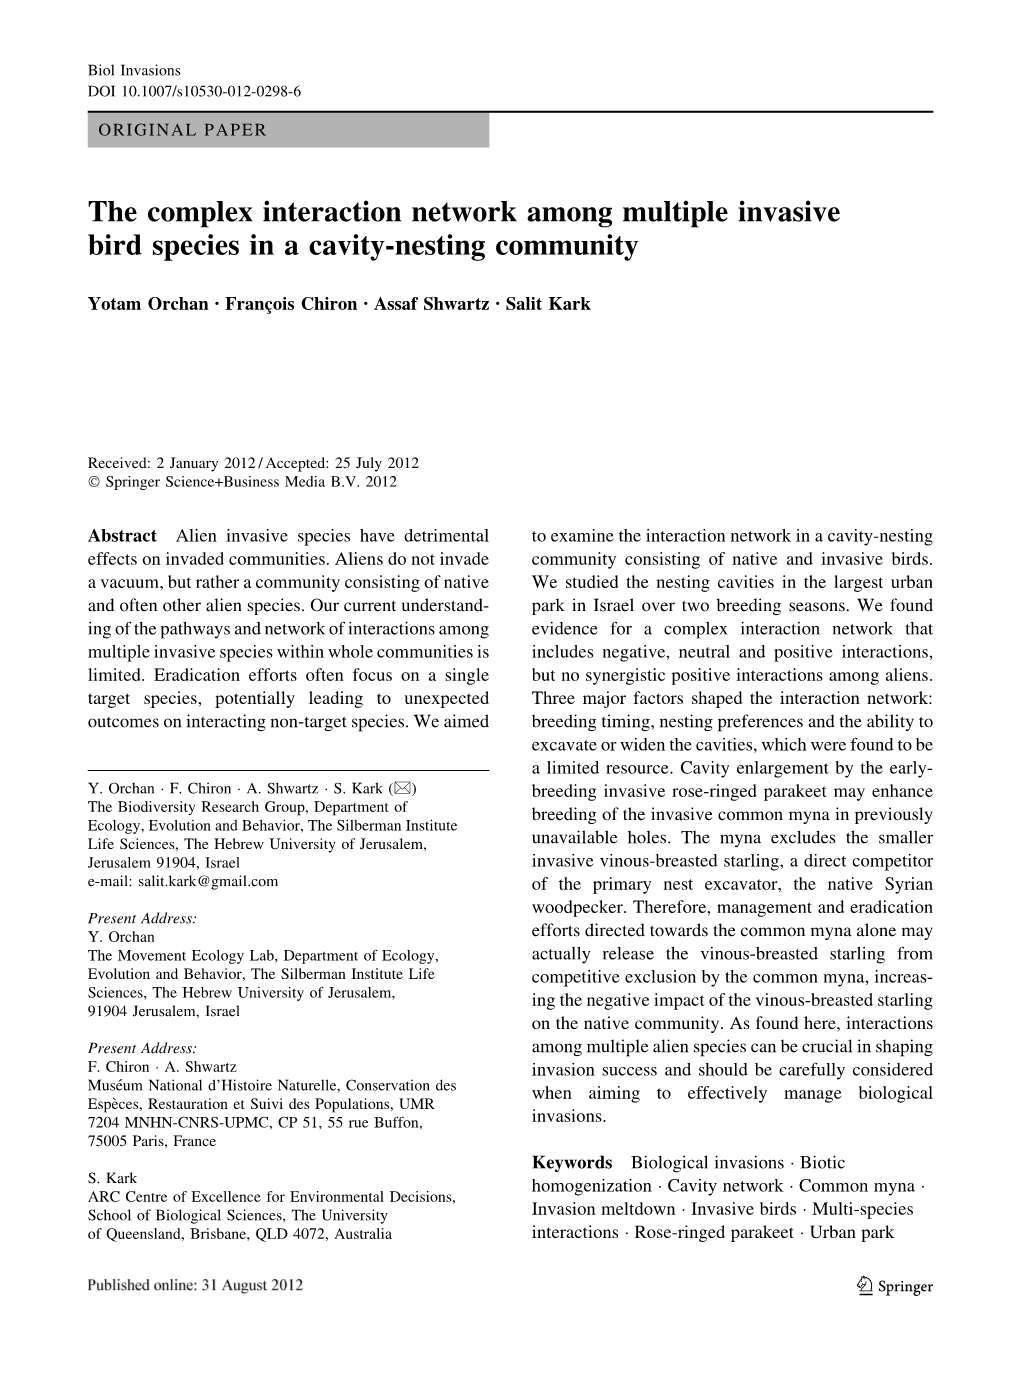 The Complex Interaction Network Among Multiple Invasive Bird Species in a Cavity-Nesting Community